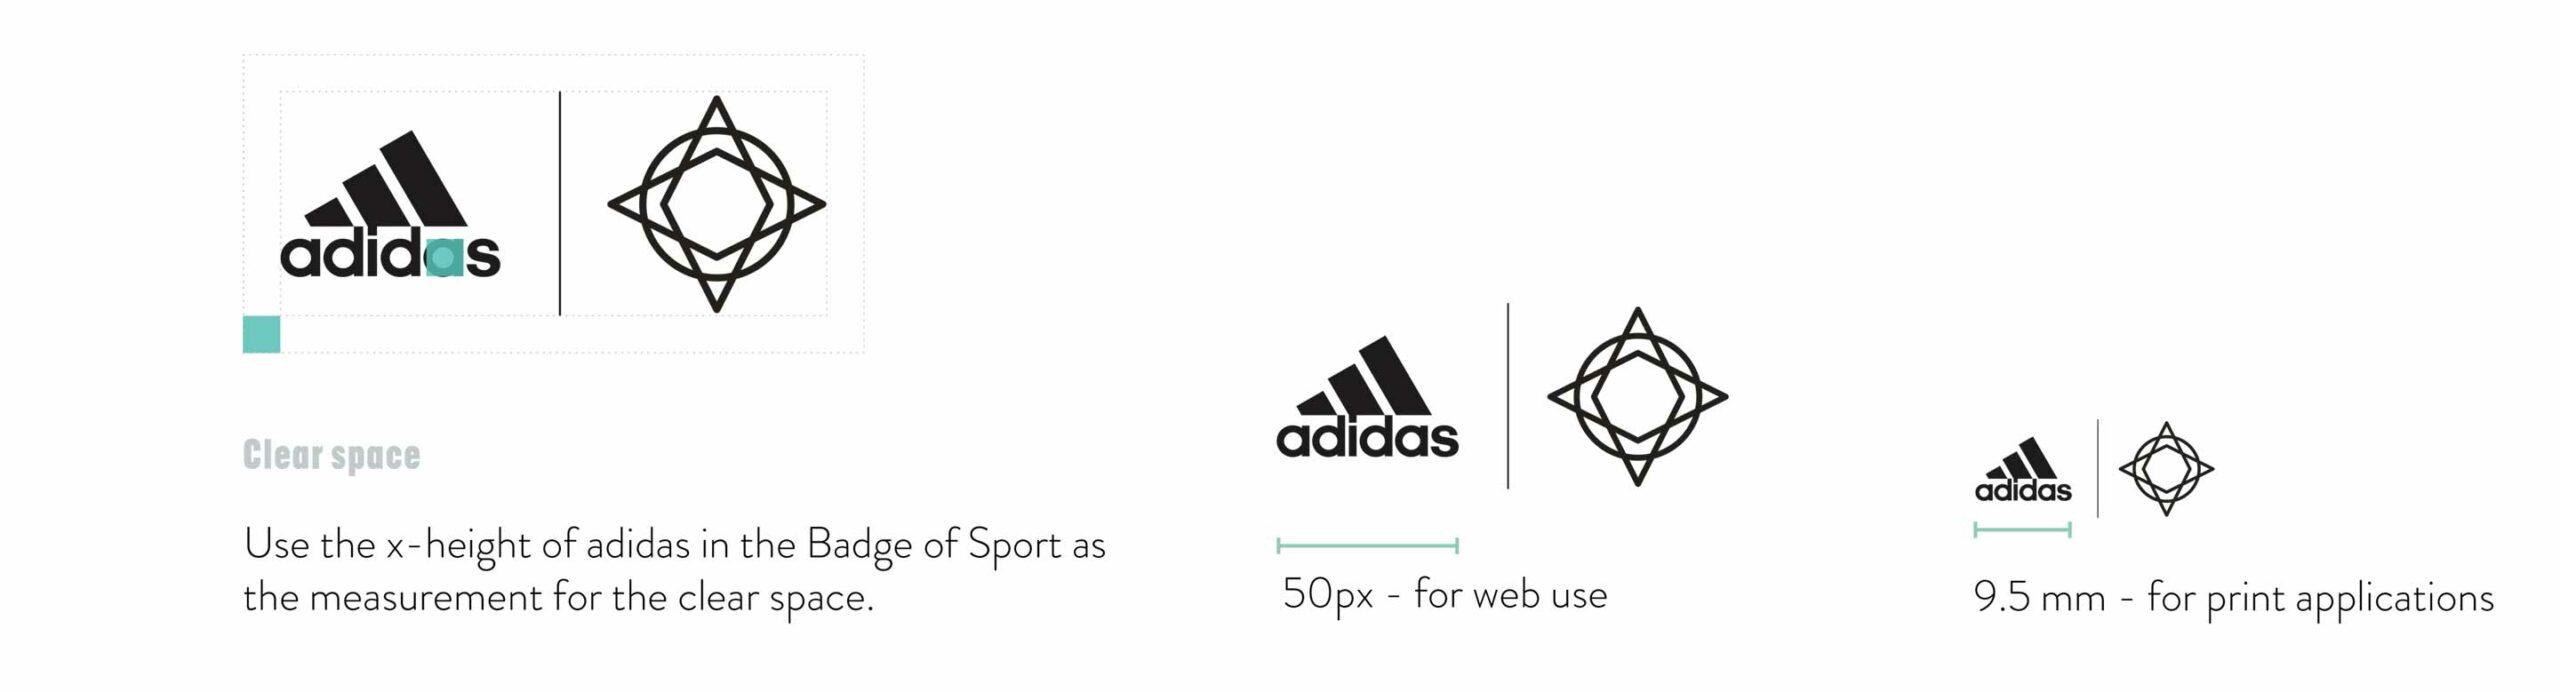 MM-Image-template-3-Adidas-logo-guide1